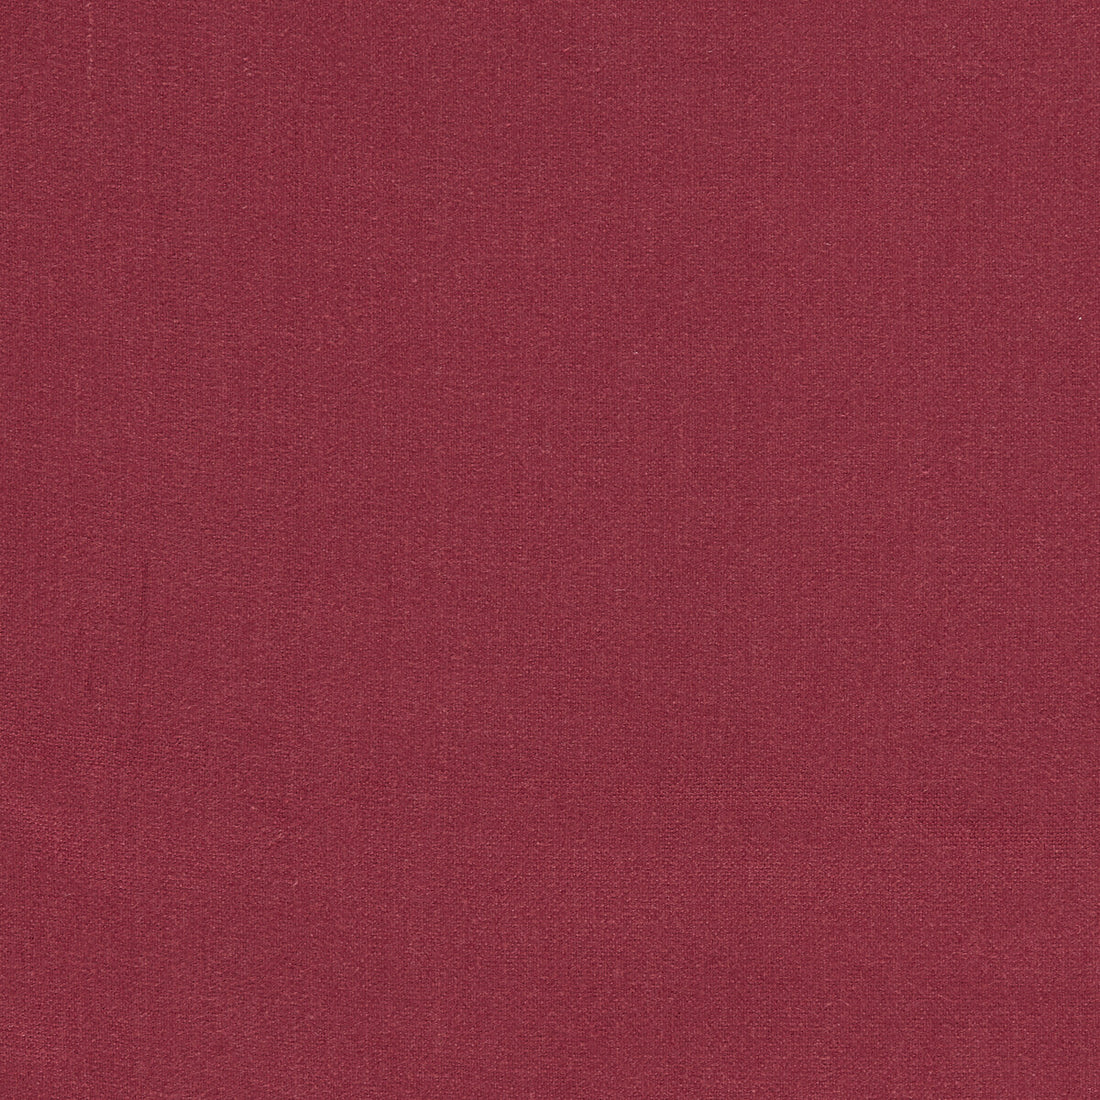 Lazio fabric in cranberry color - pattern F1537/09.CAC.0 - by Clarke And Clarke in the Clarke &amp; Clarke Lazio collection